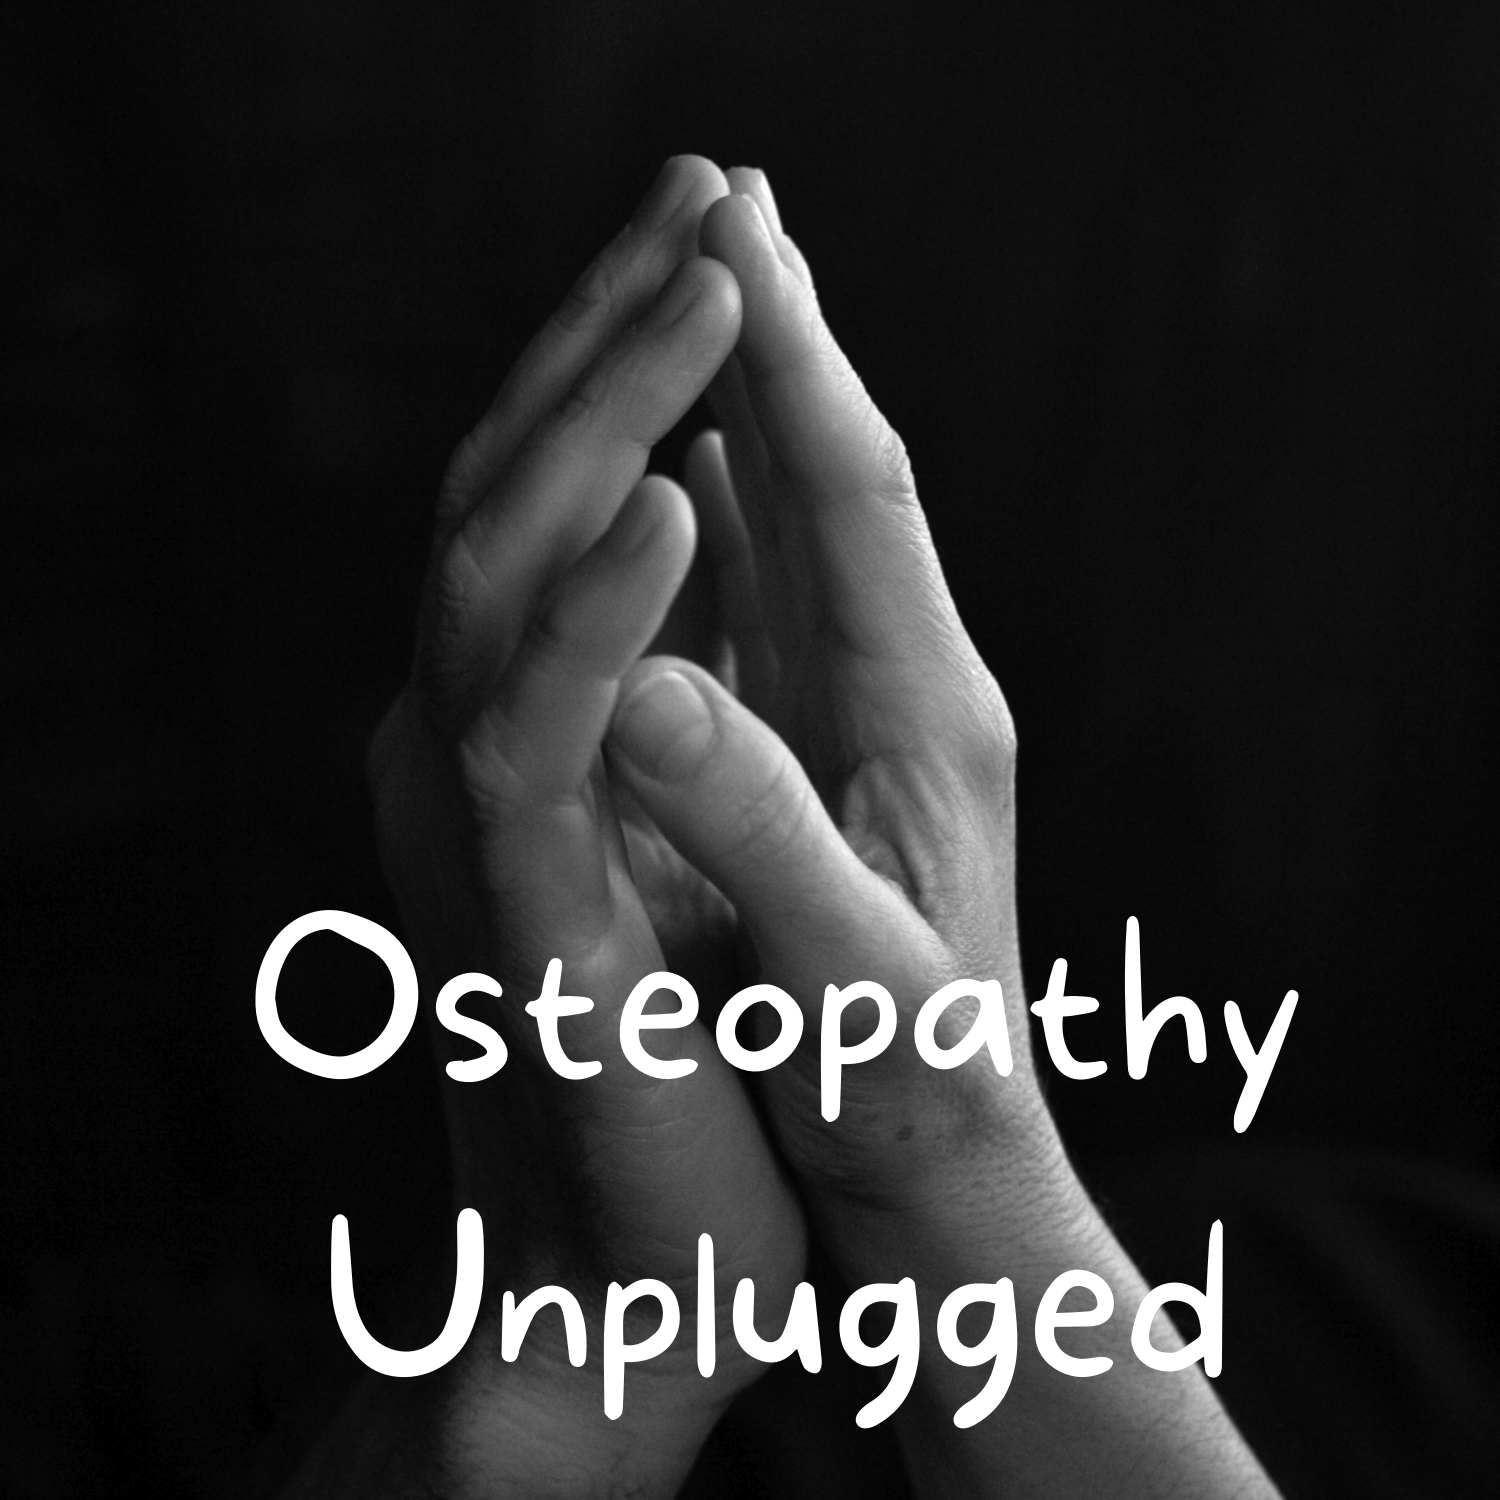 Episode 21 - How Long Does it Take For an Osteopathic Treatment to Start Working?